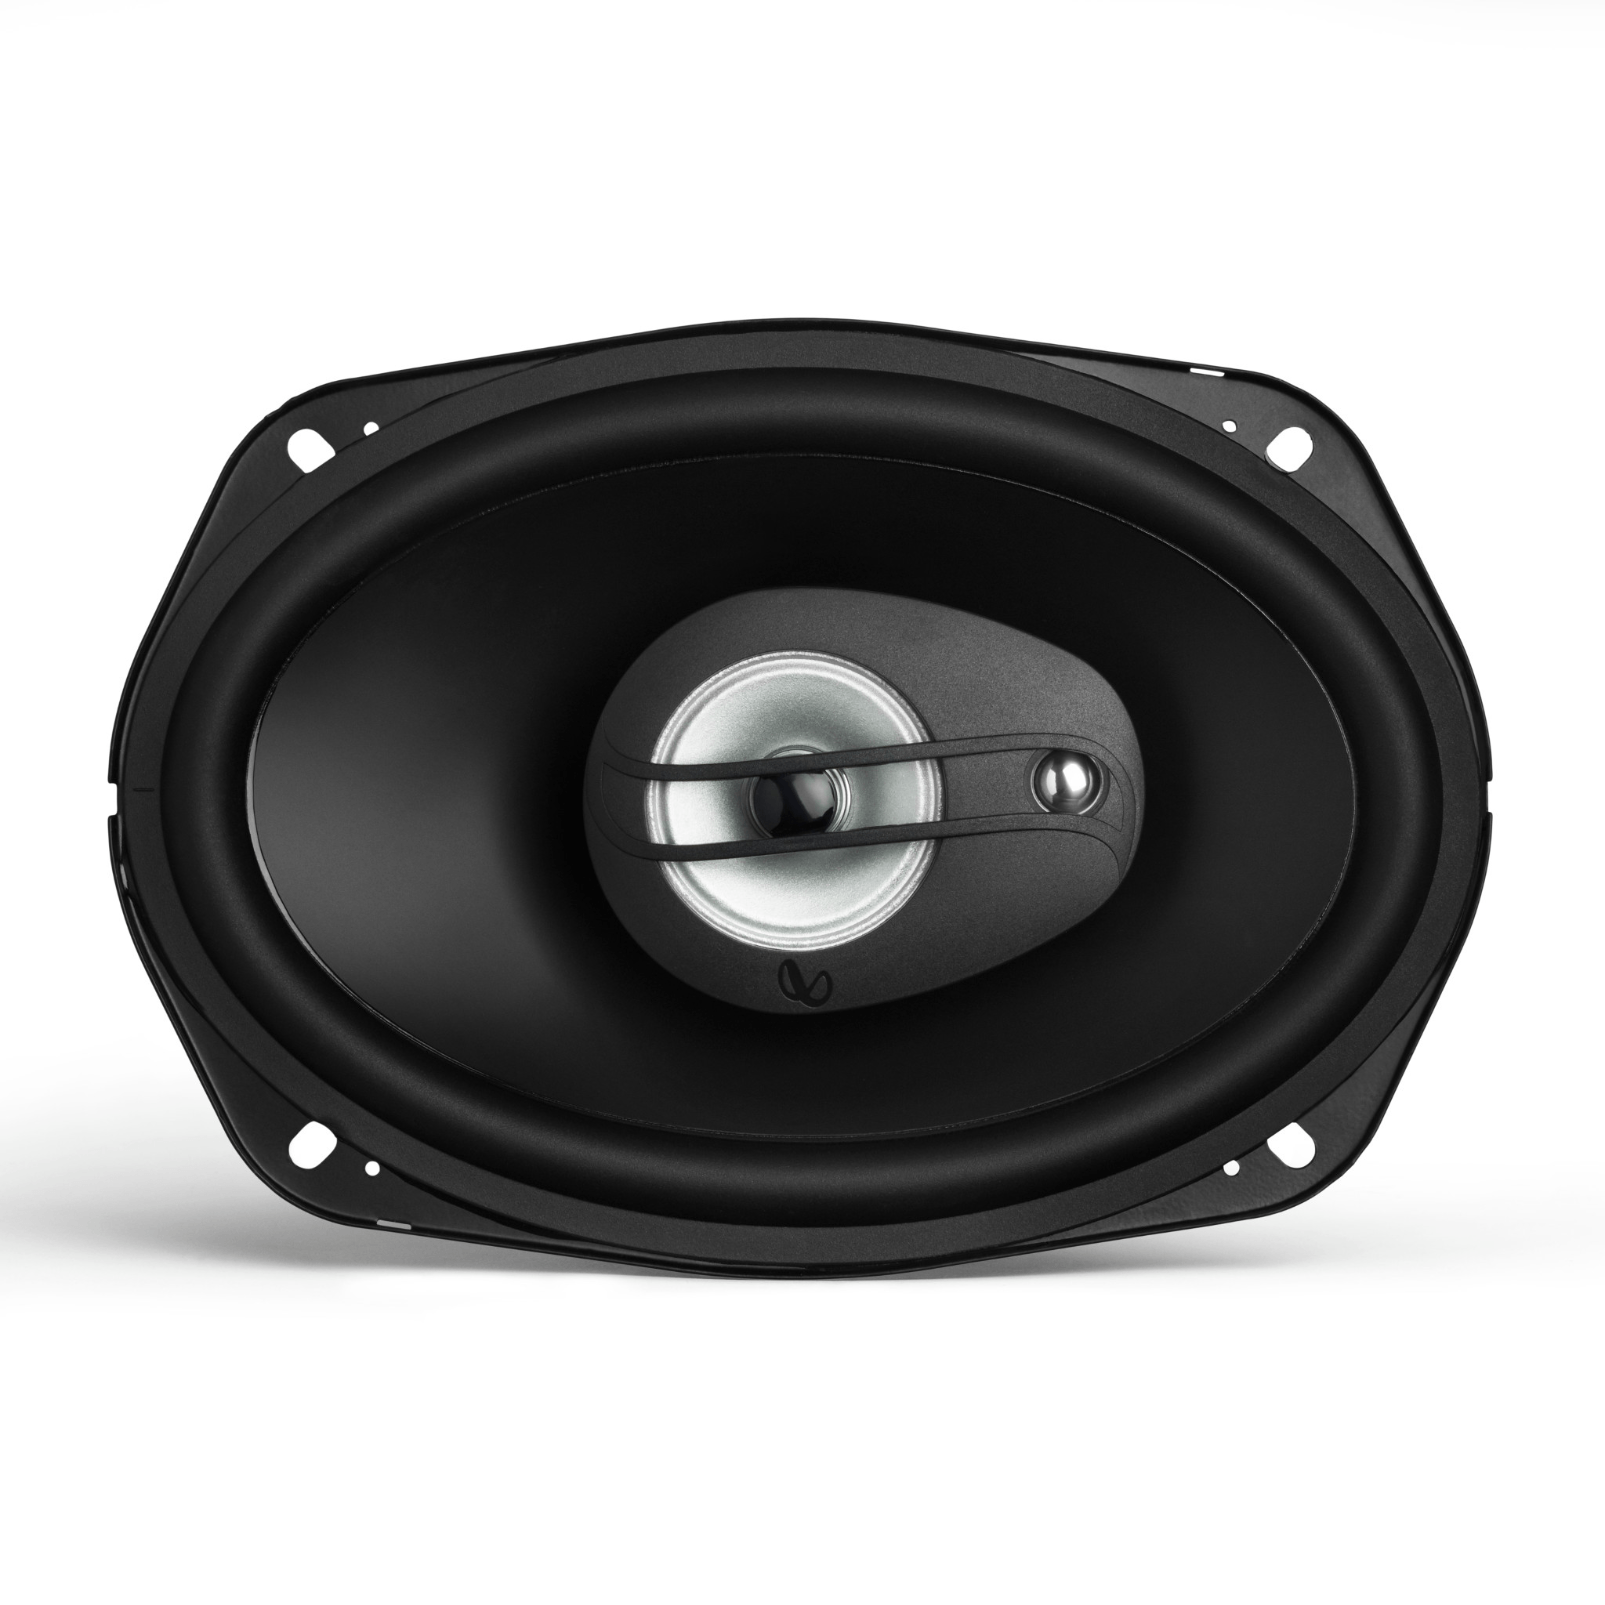 Infinity Alpha 6930 6” X 9” 3-Way Tri-Axial Speakers